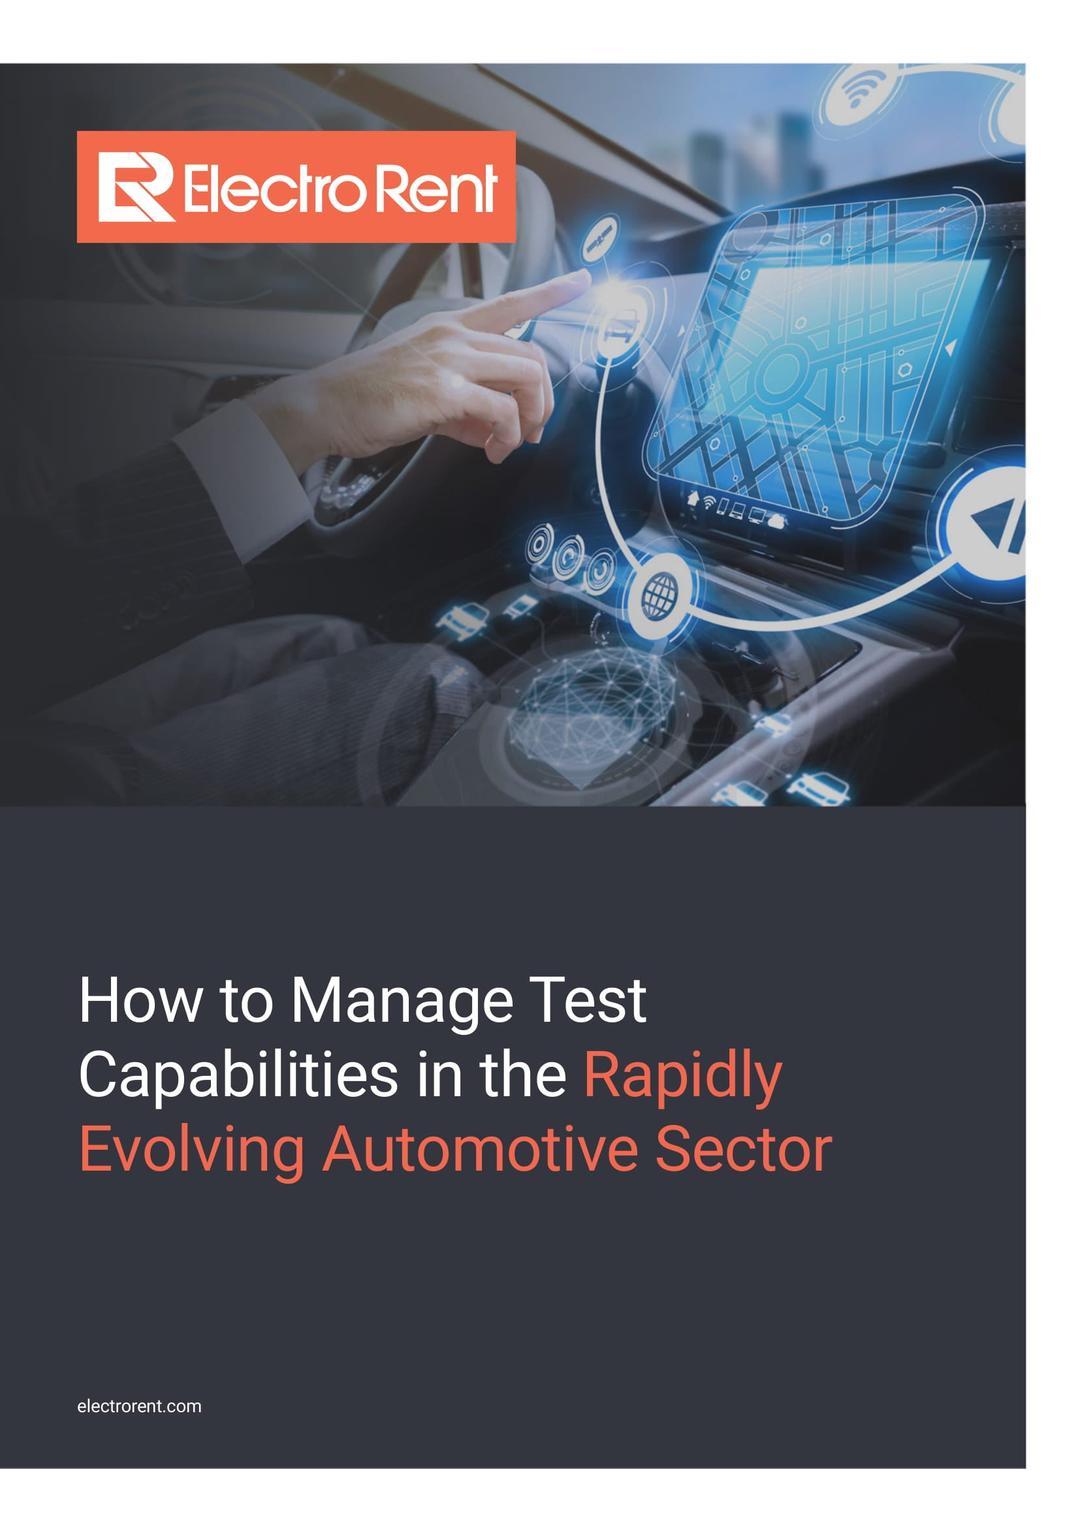 How To Manage Test in the Rapidly Evolving Automotive Sector, image